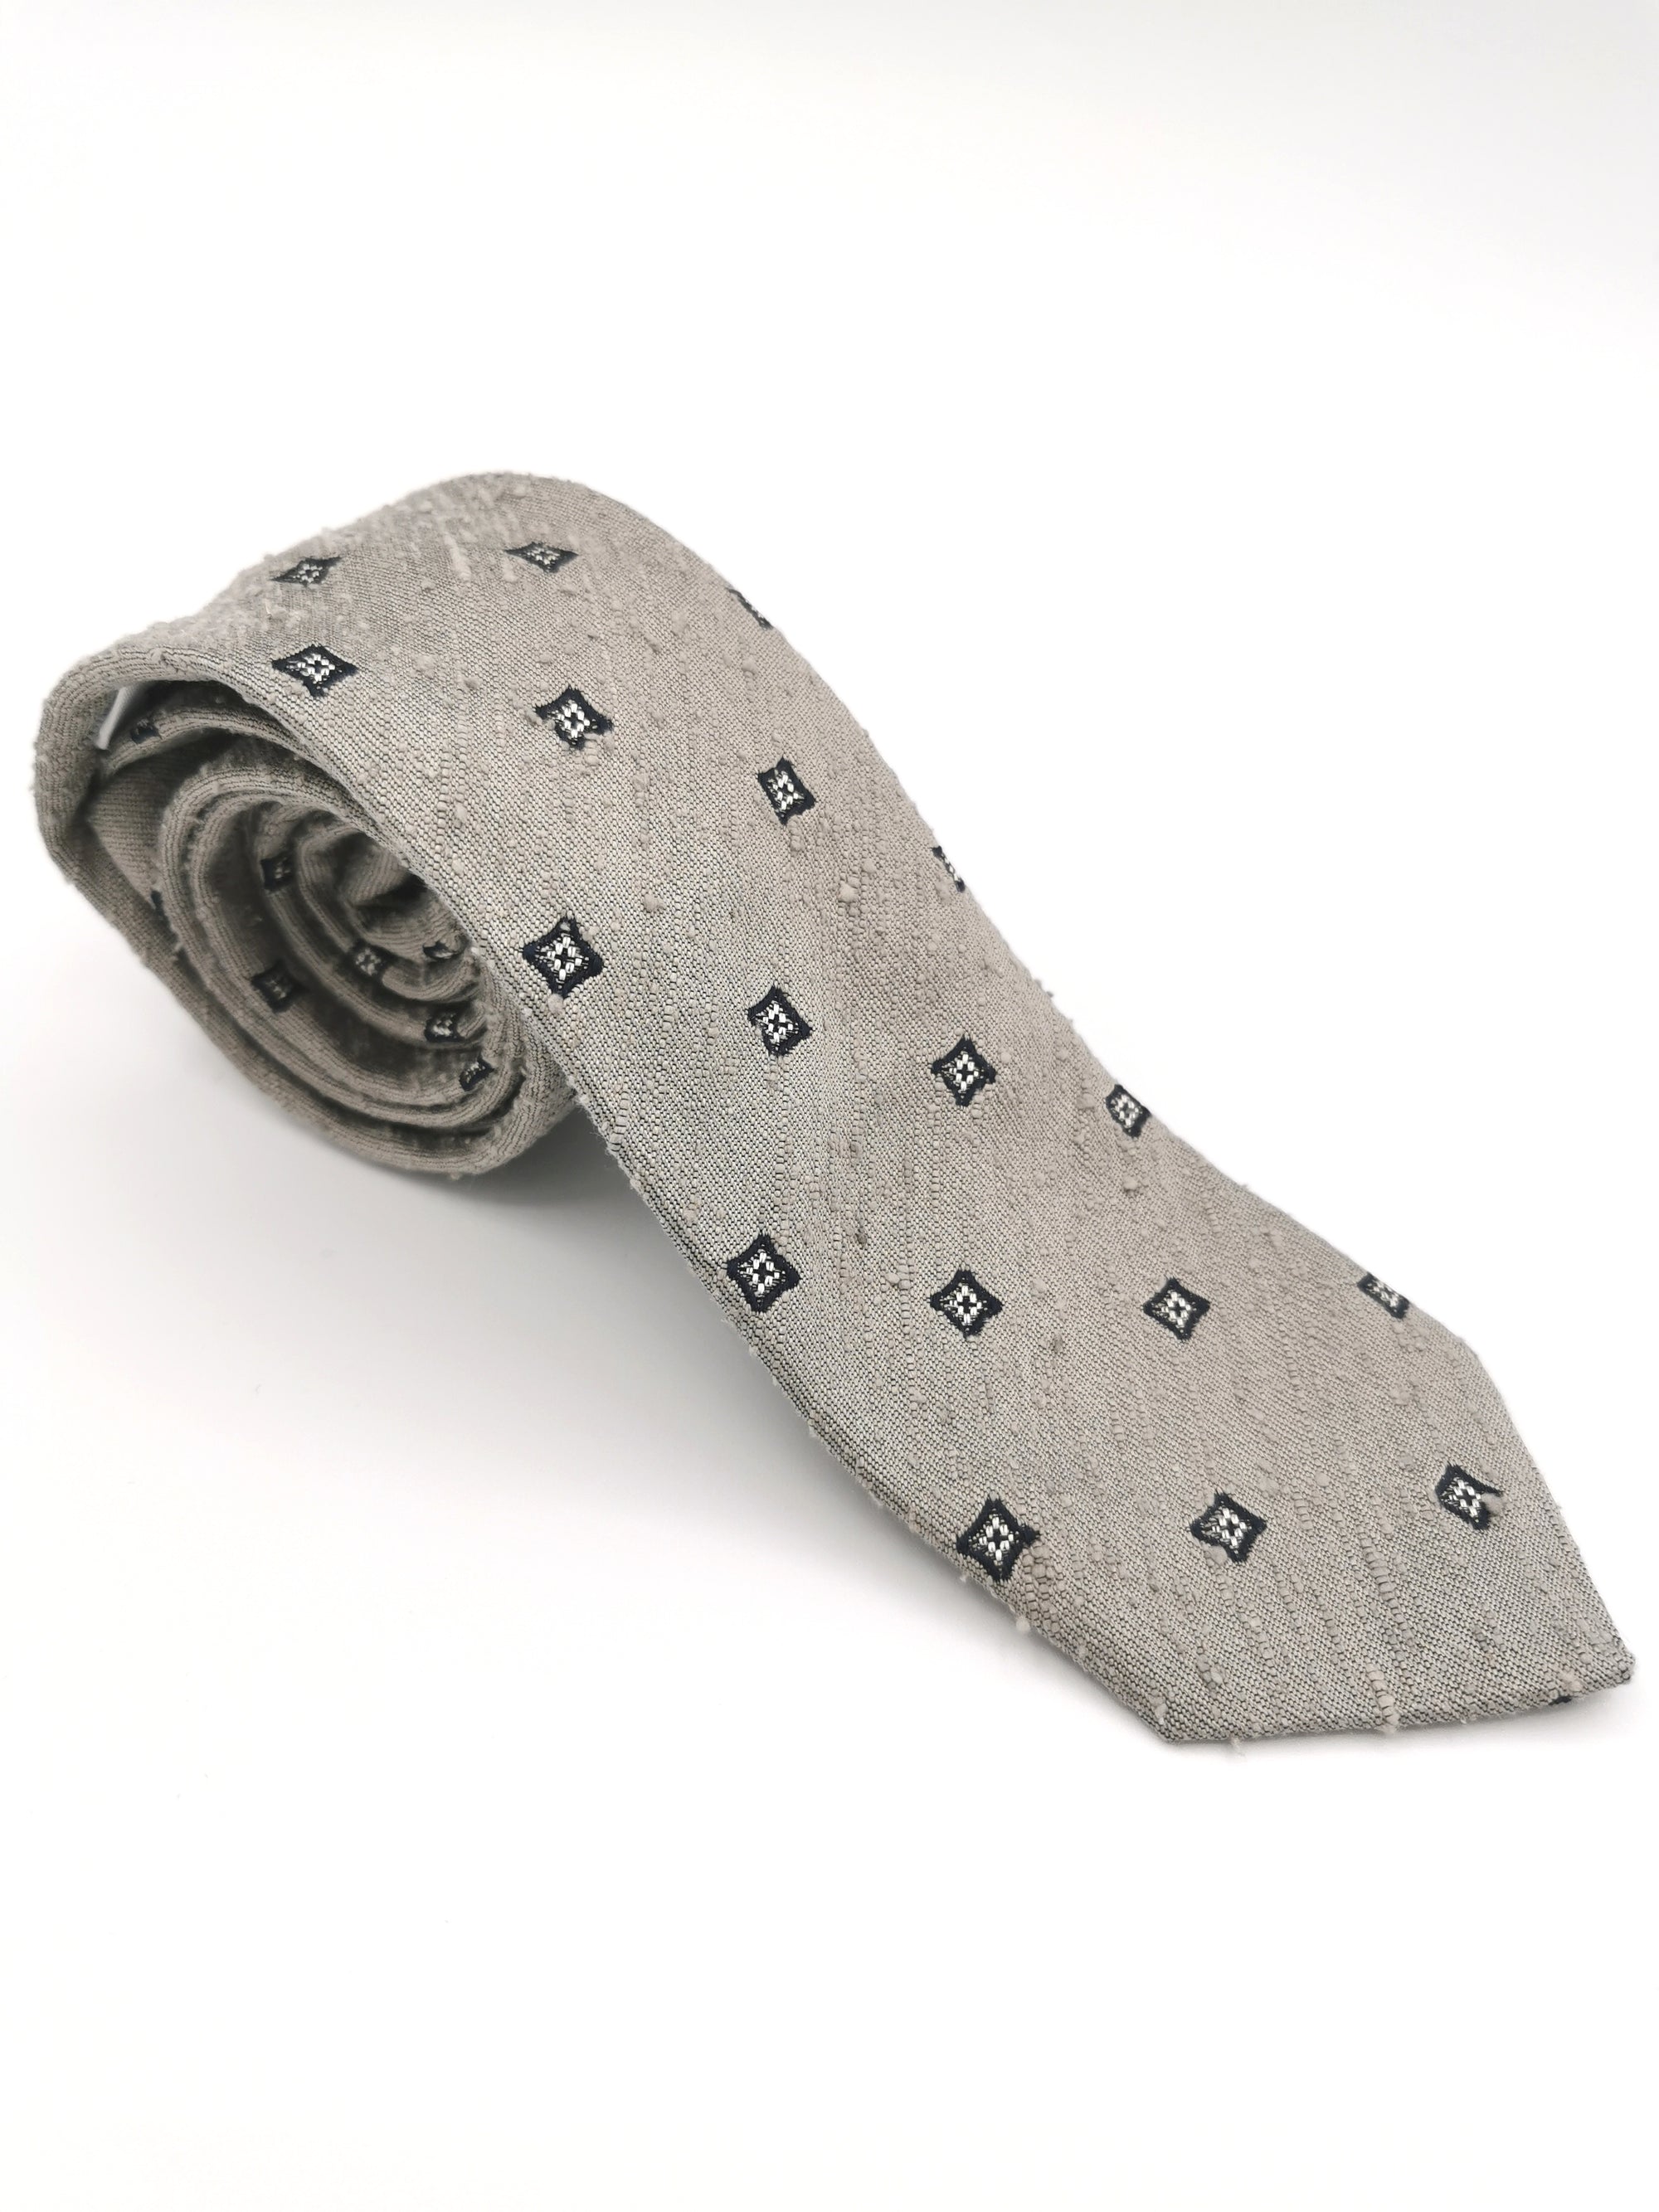 Shantung silk tie with small rectangles pattern